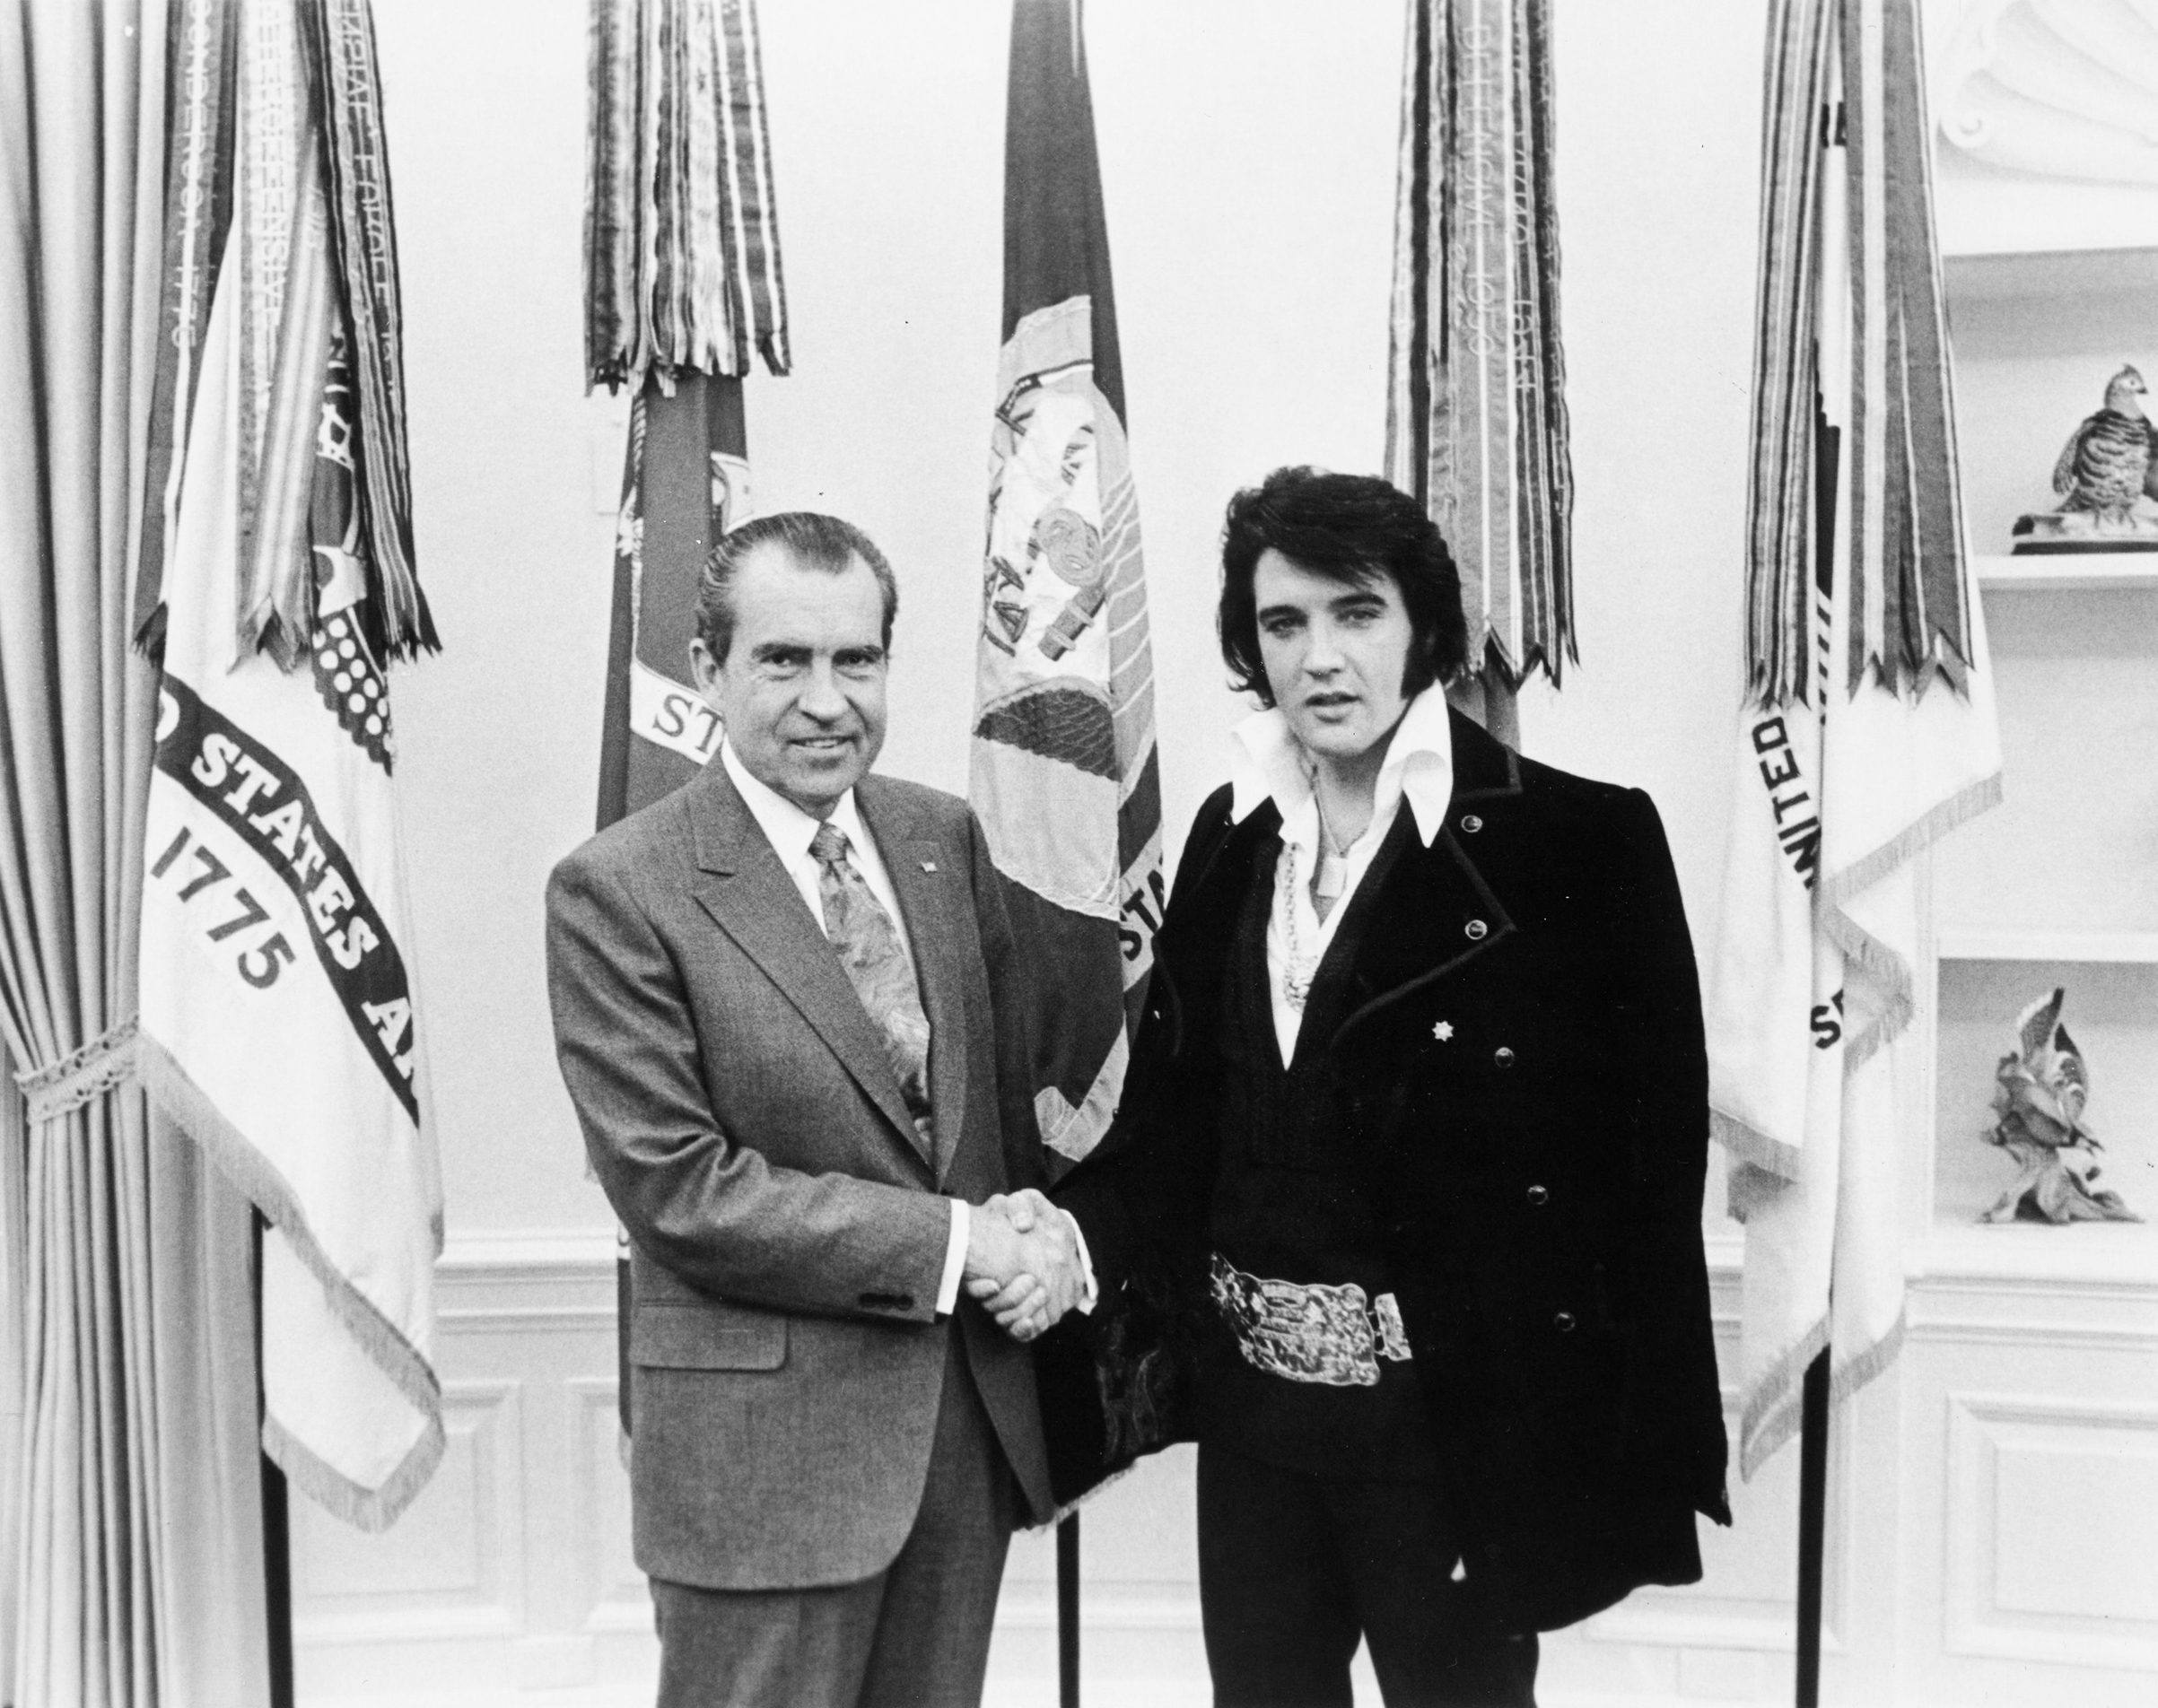 President Nixon and Elvis Presley meet at The White House, December 21, 1970. (MPI/Getty Images)